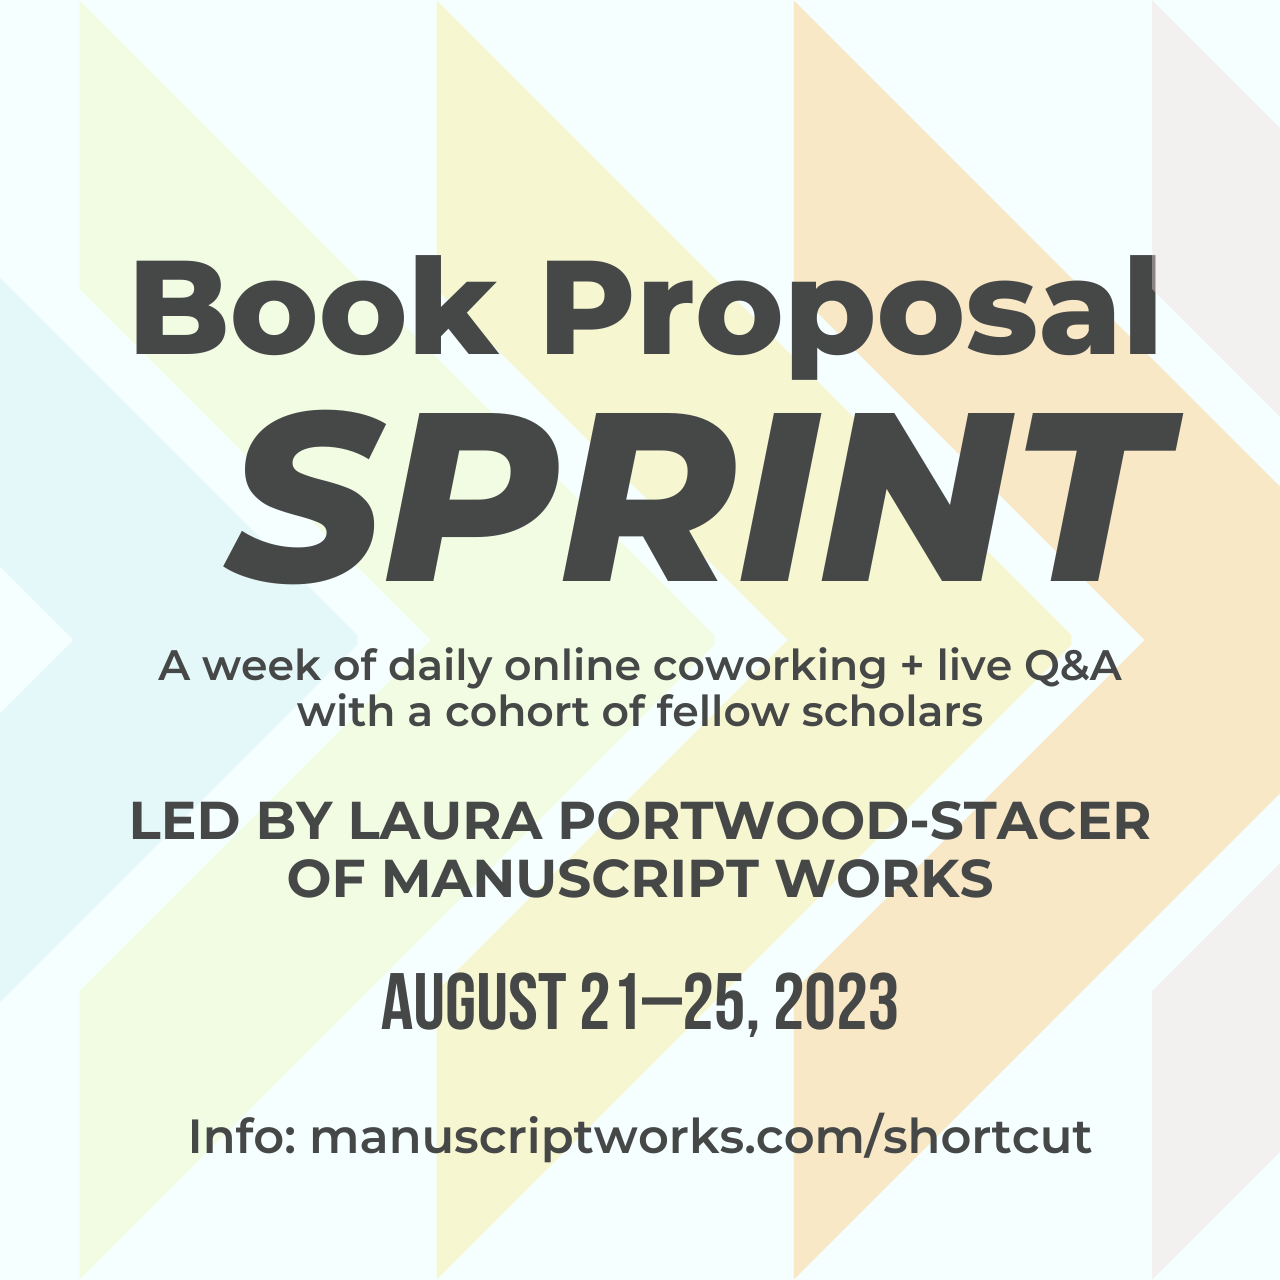 Graphic thumbnail for the Book Proposal Sprint